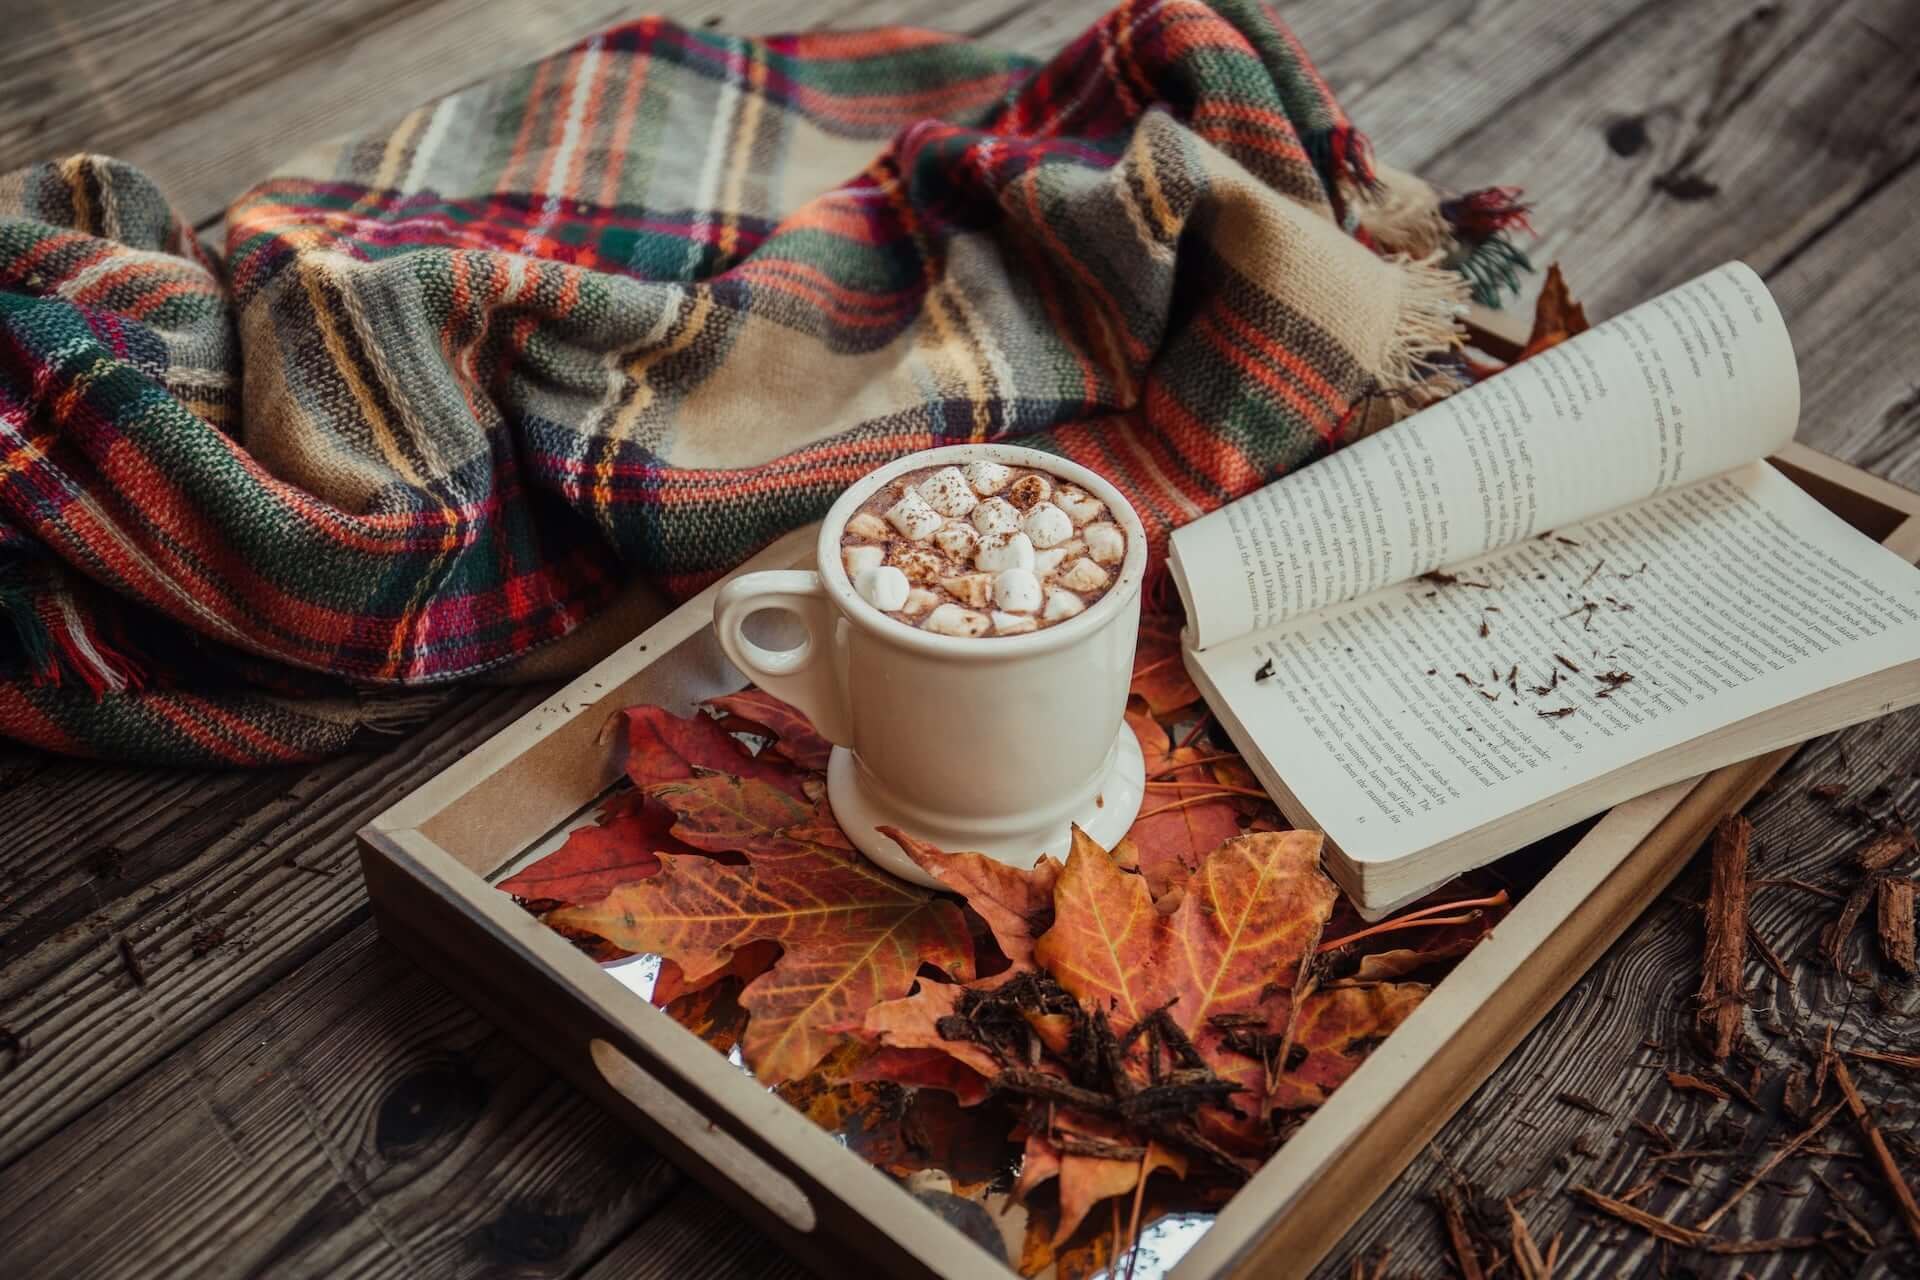 A cup of hot cocoa with marshmallows and an open book sit on a tray full of leaves with a tartan scarf.